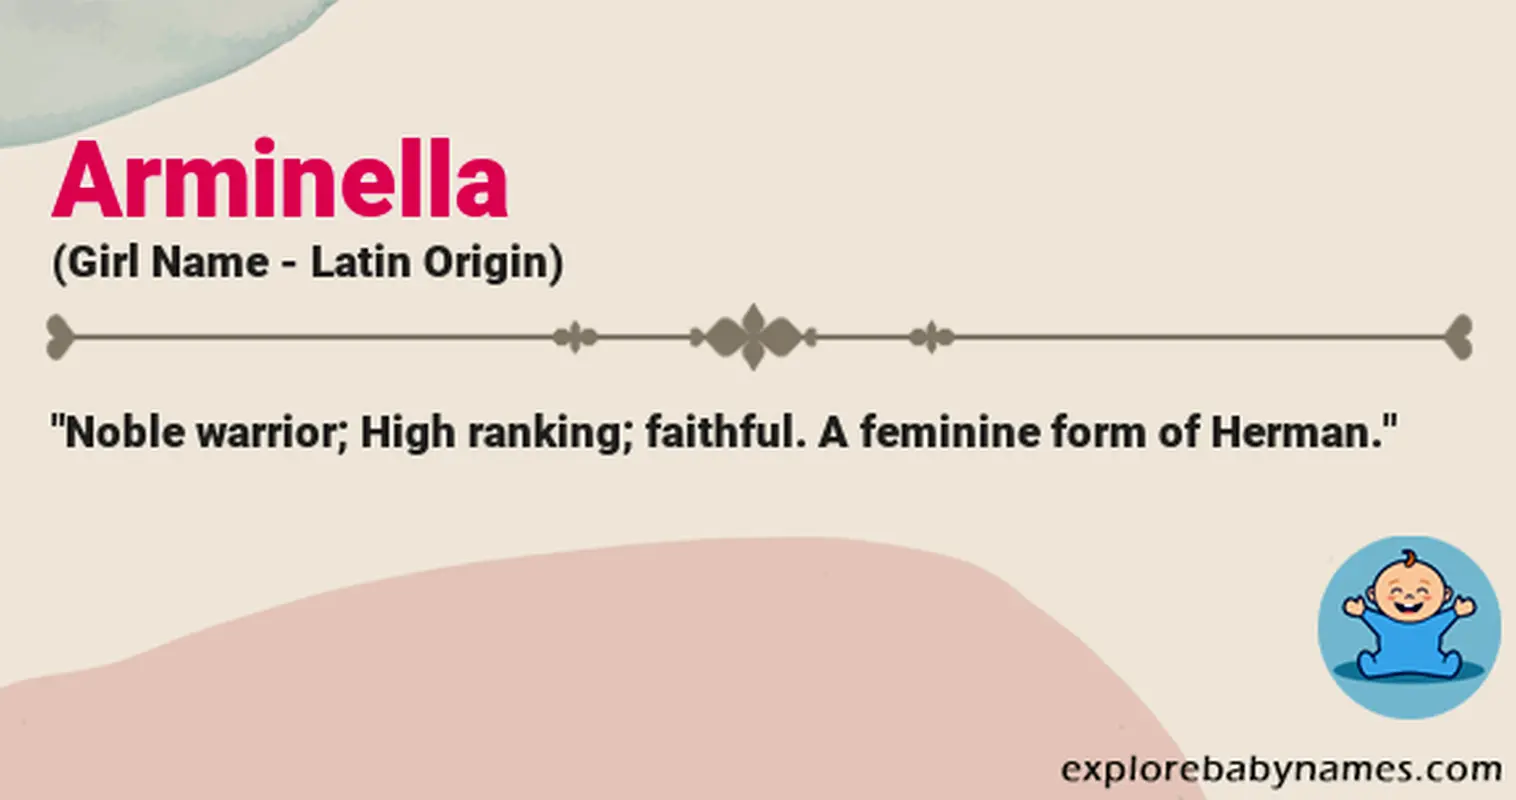 Meaning of Arminella